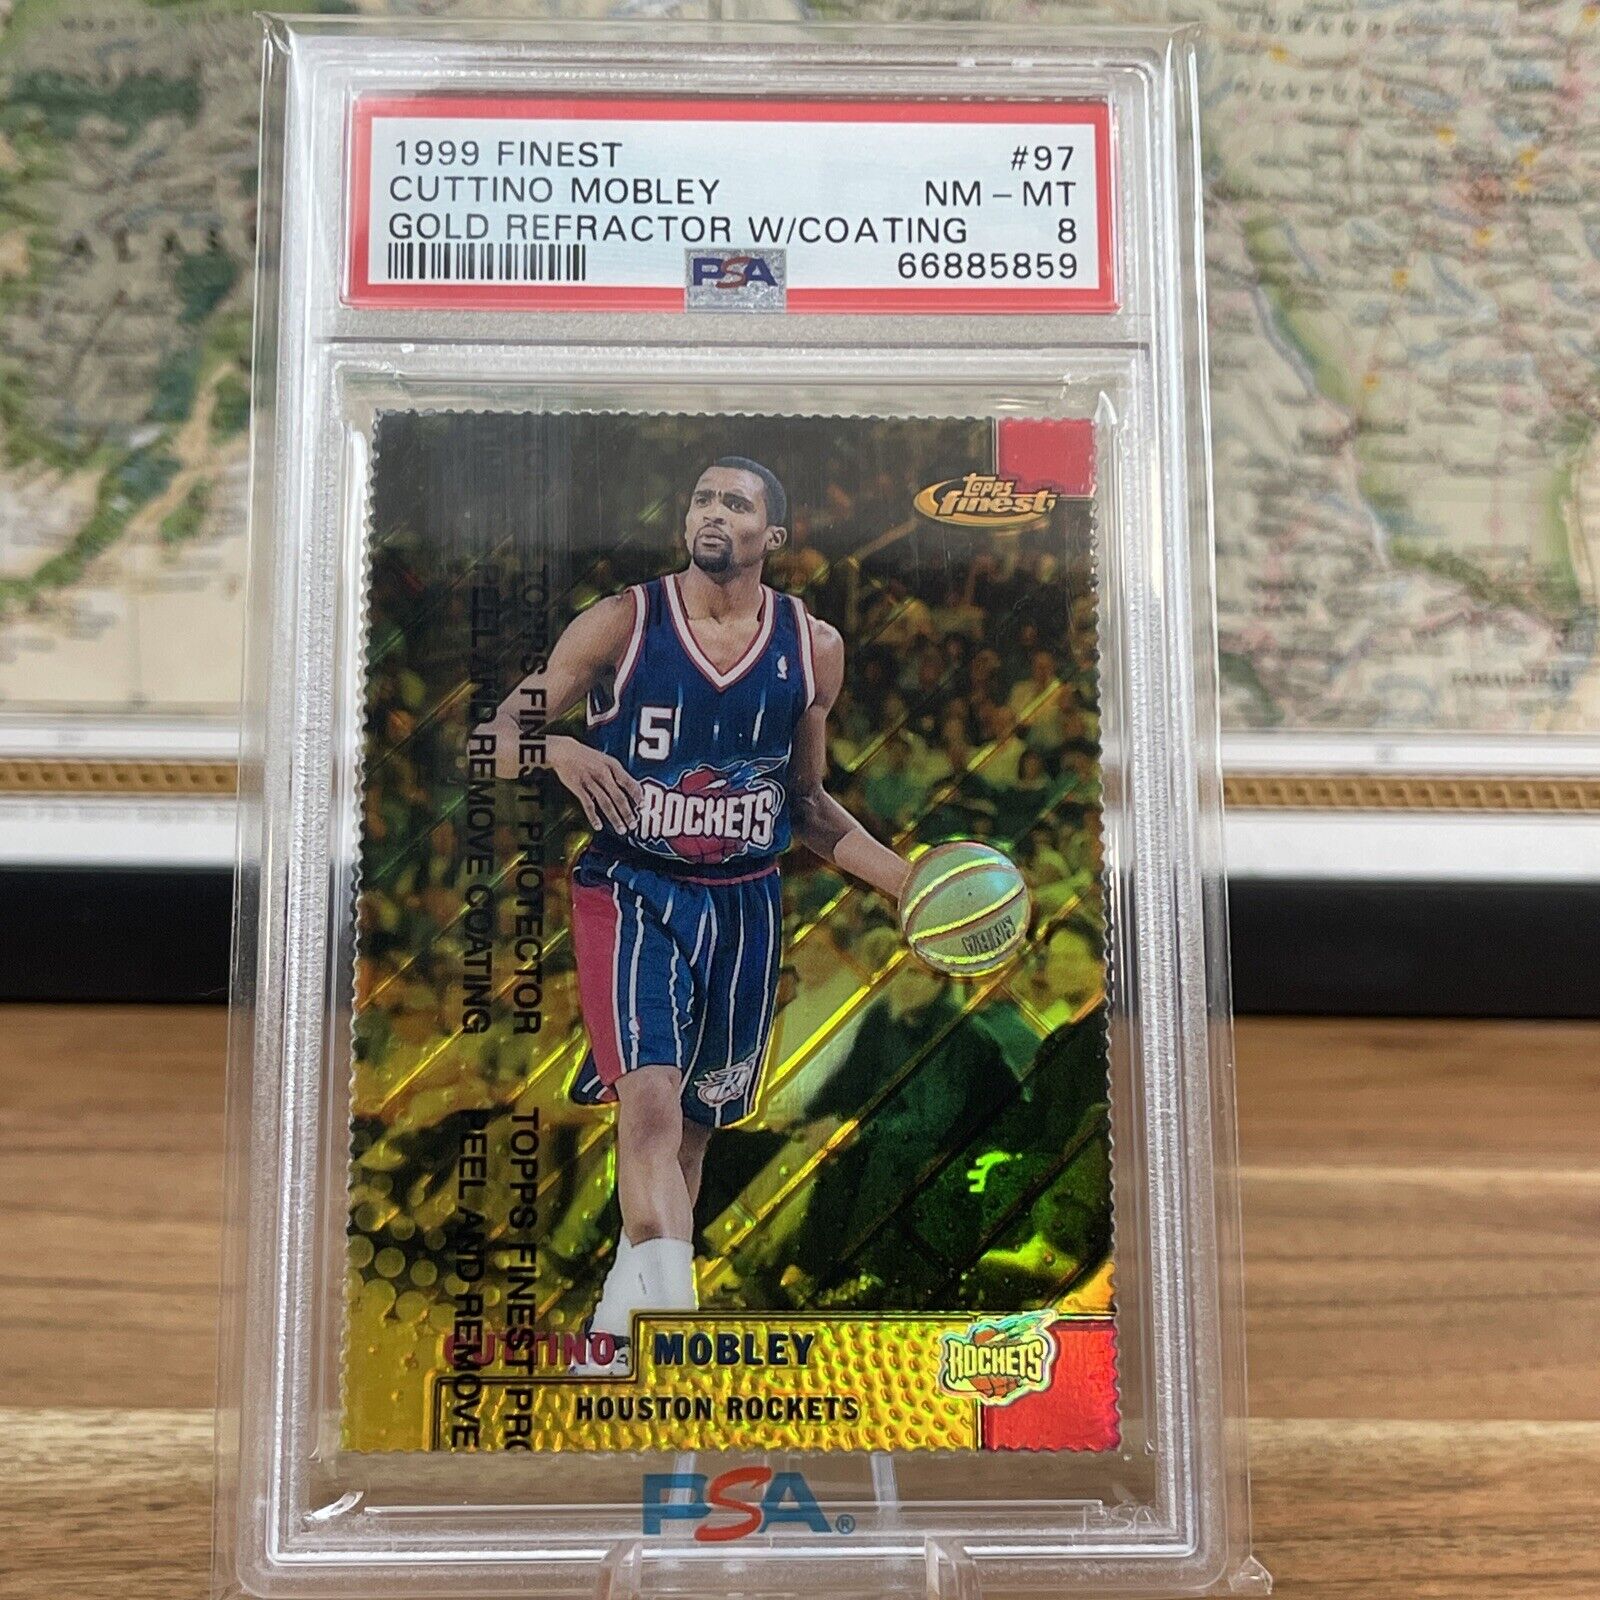 1999 Topps Finest Cuttino Mobley Gold Refractor W/ Coating 078/100 PSA 8 Rare